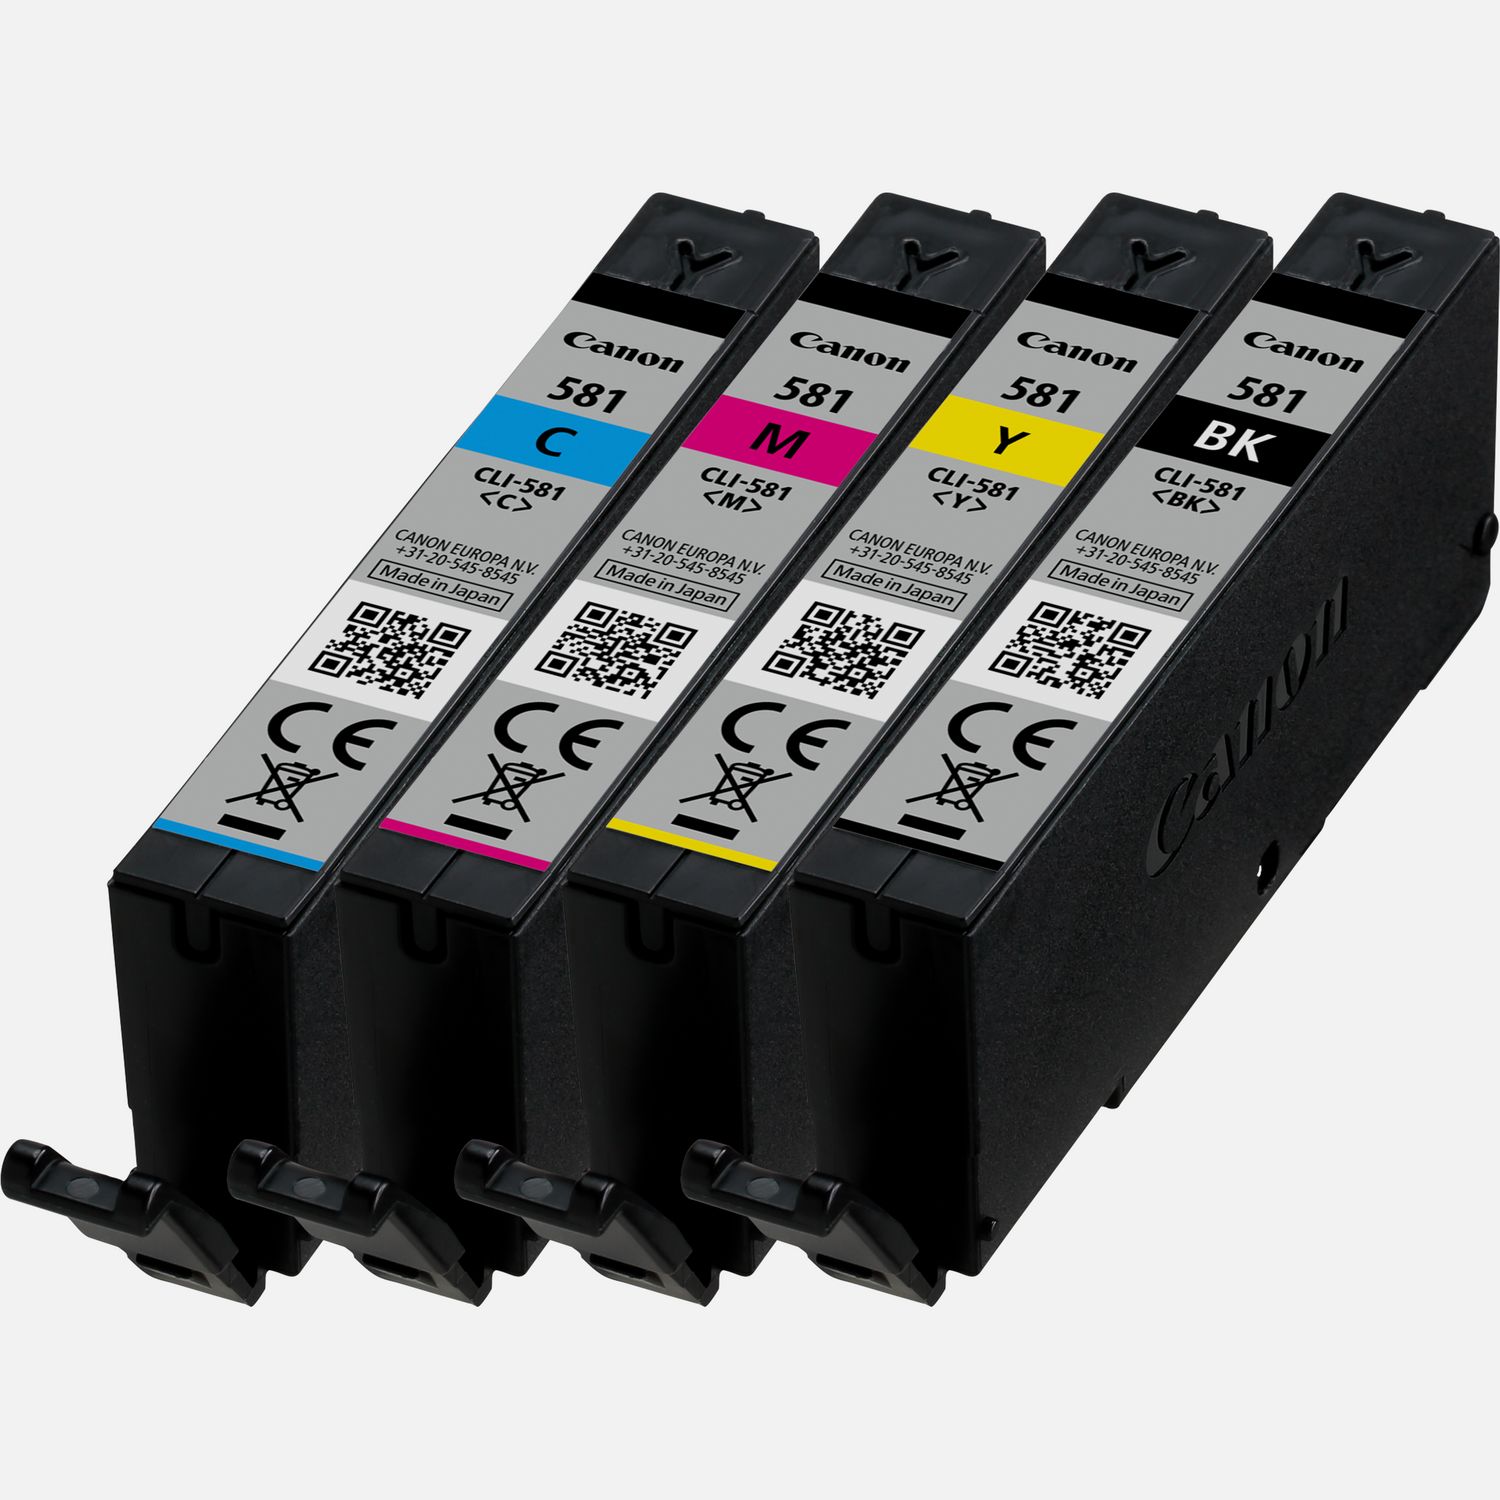 CANON INK CARTRIDGE CLI-581 YELLOW FOR TS6150, TS8150, TS9150, TR8550 :: PC  in Cyprus